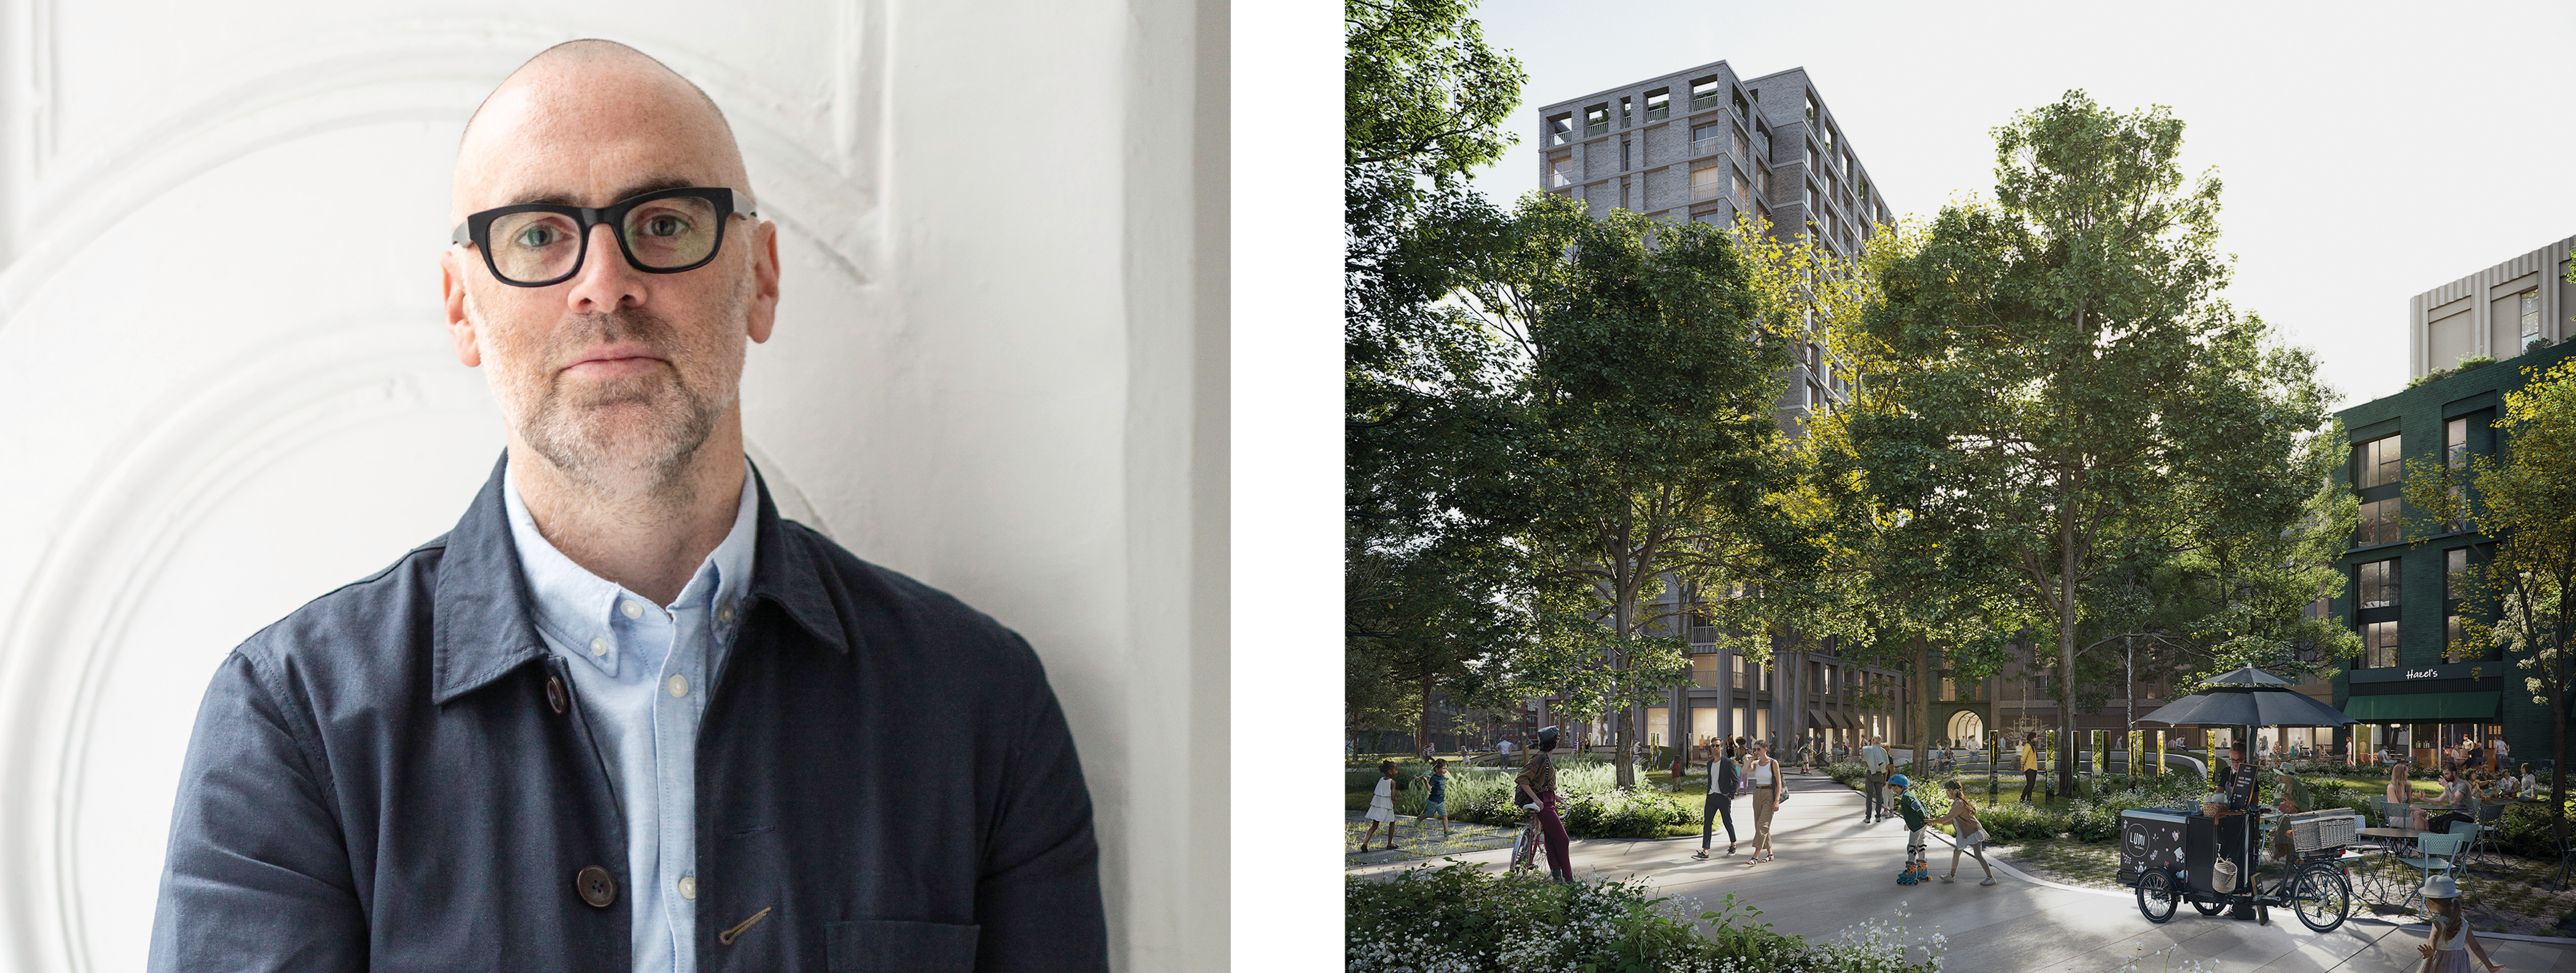 Faulknerbrowns Architects Announces New Partners Niall Durney L